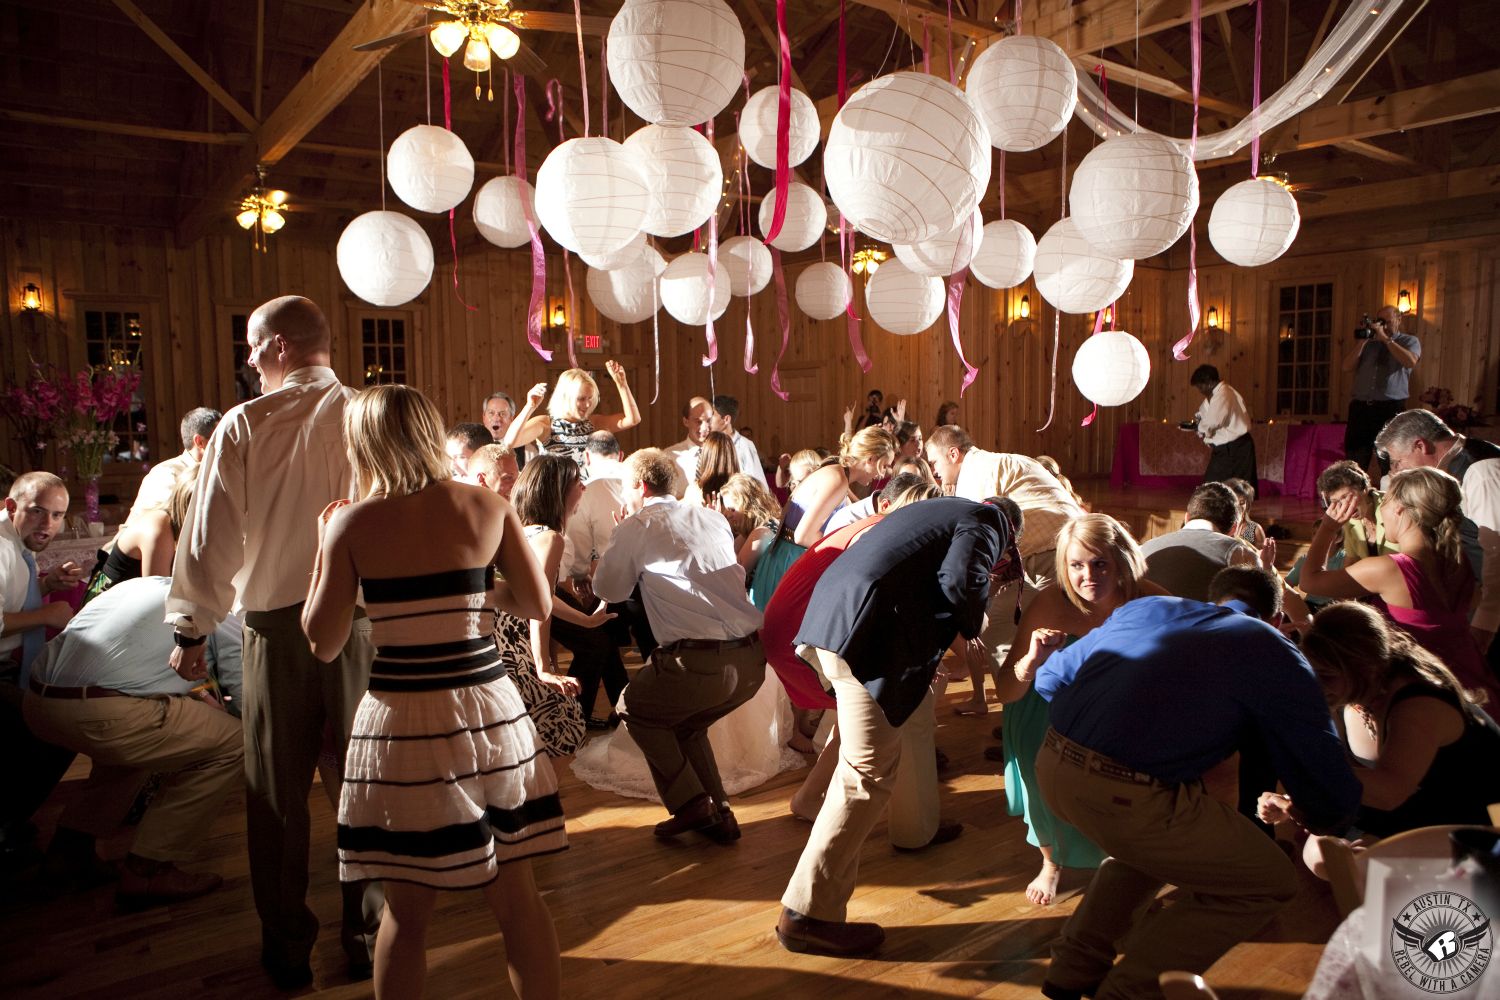 Festive guests dancing under white paper lanterns and pink ribbons at wedding reception at the rustic Texas Old Town Austin area wedding venue.